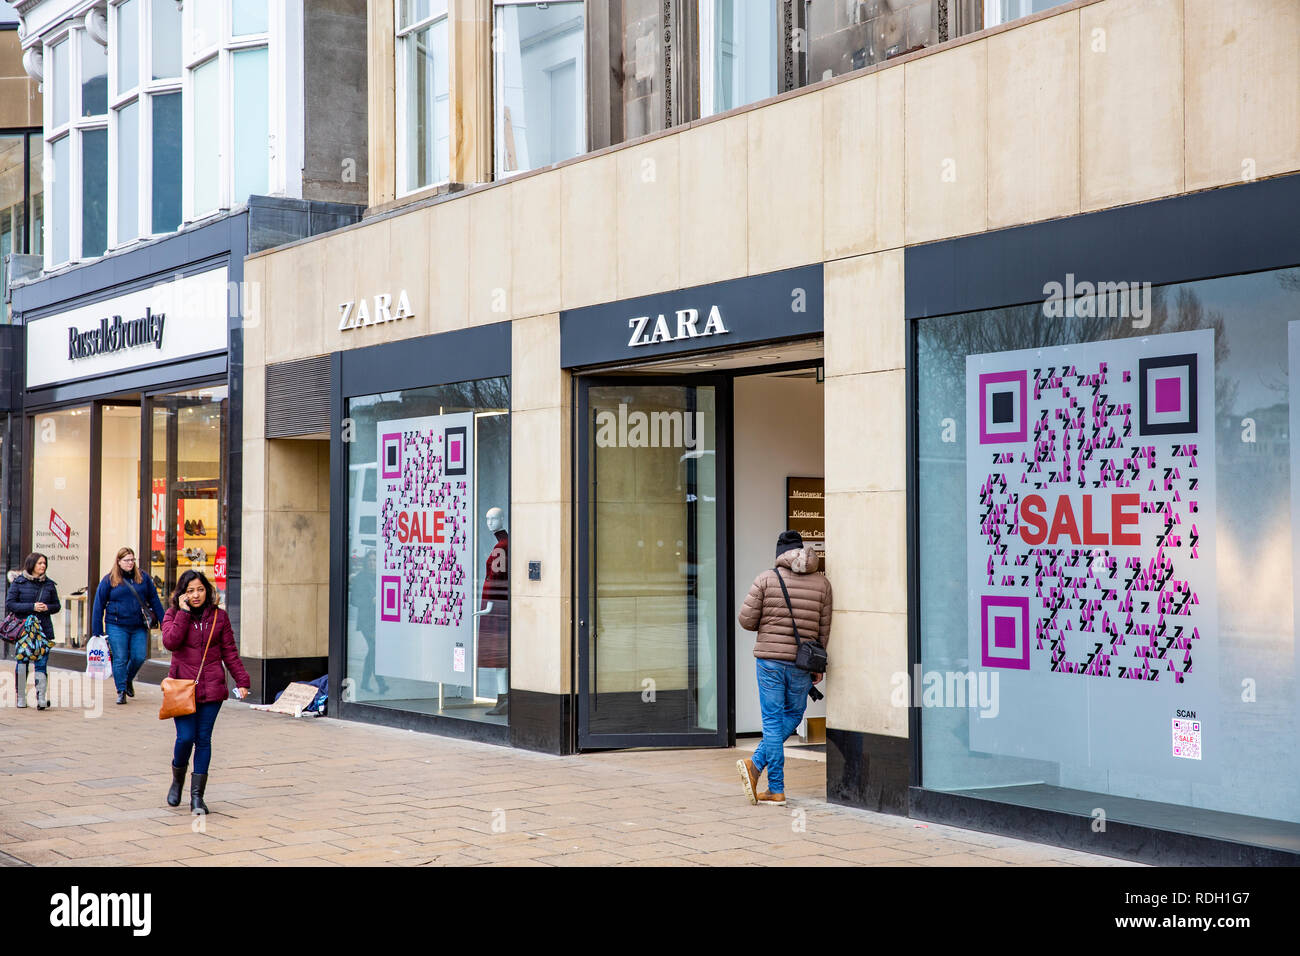 Zara store and Russell and Bromley shoe shop in Princes street,Edinburgh, Scotland,UK Stock Photo - Alamy